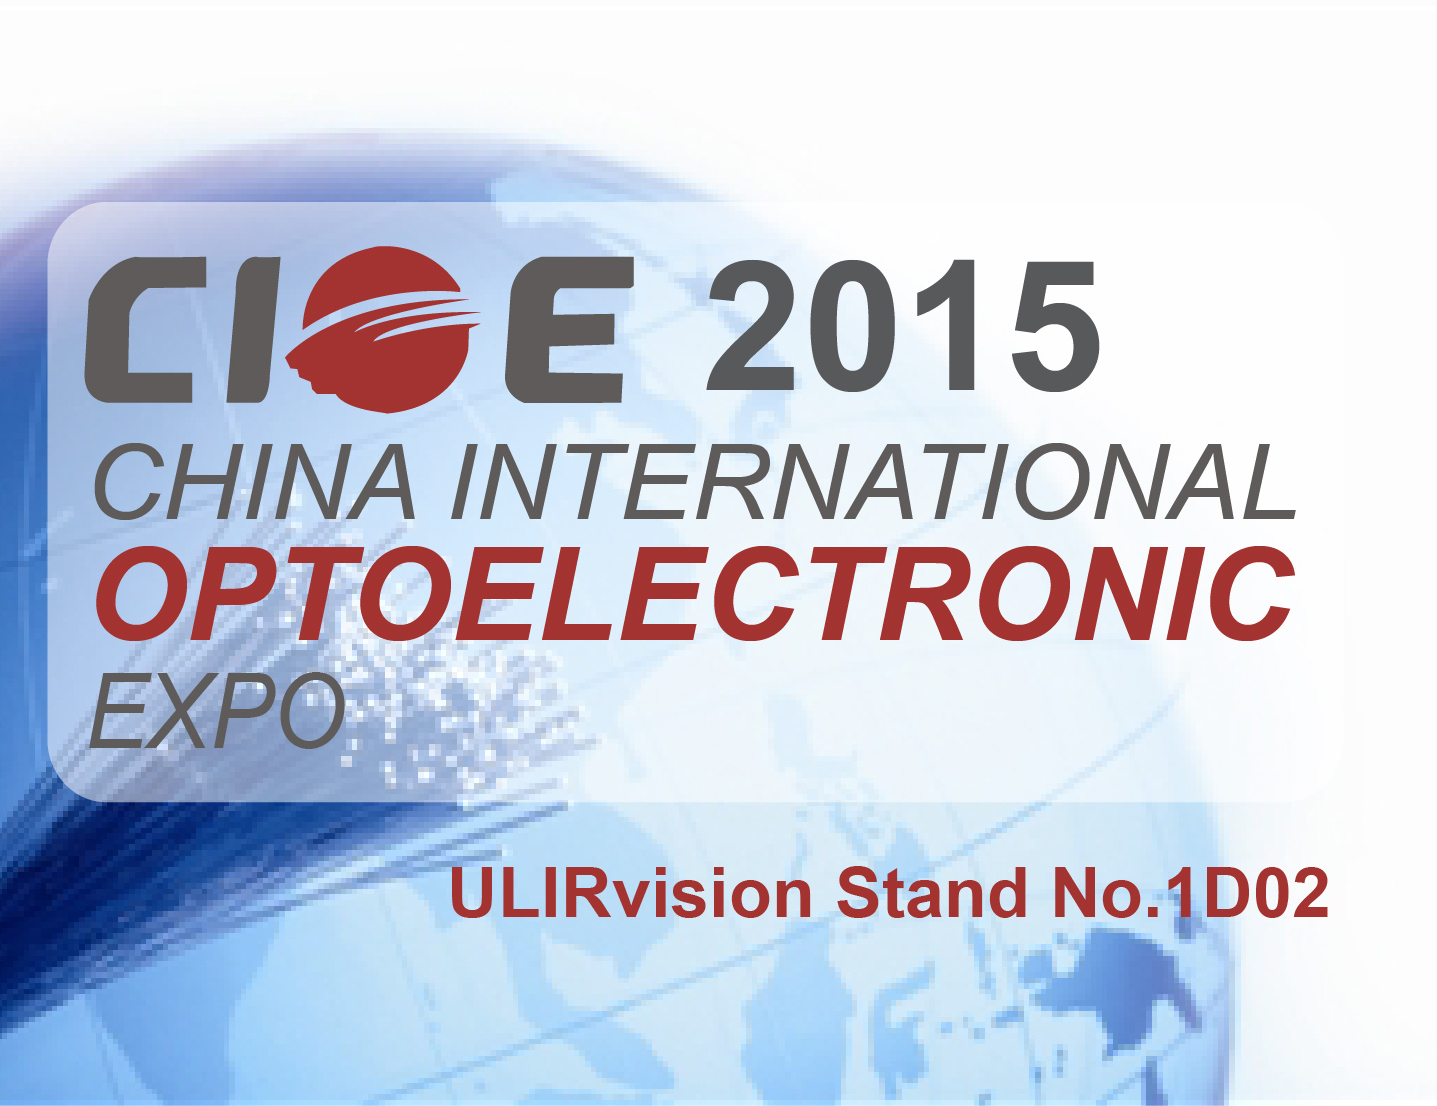 ULIRVISION Shine Out at CIOE 2015<br><br>
The 17th China International Optoelectronic Exposition